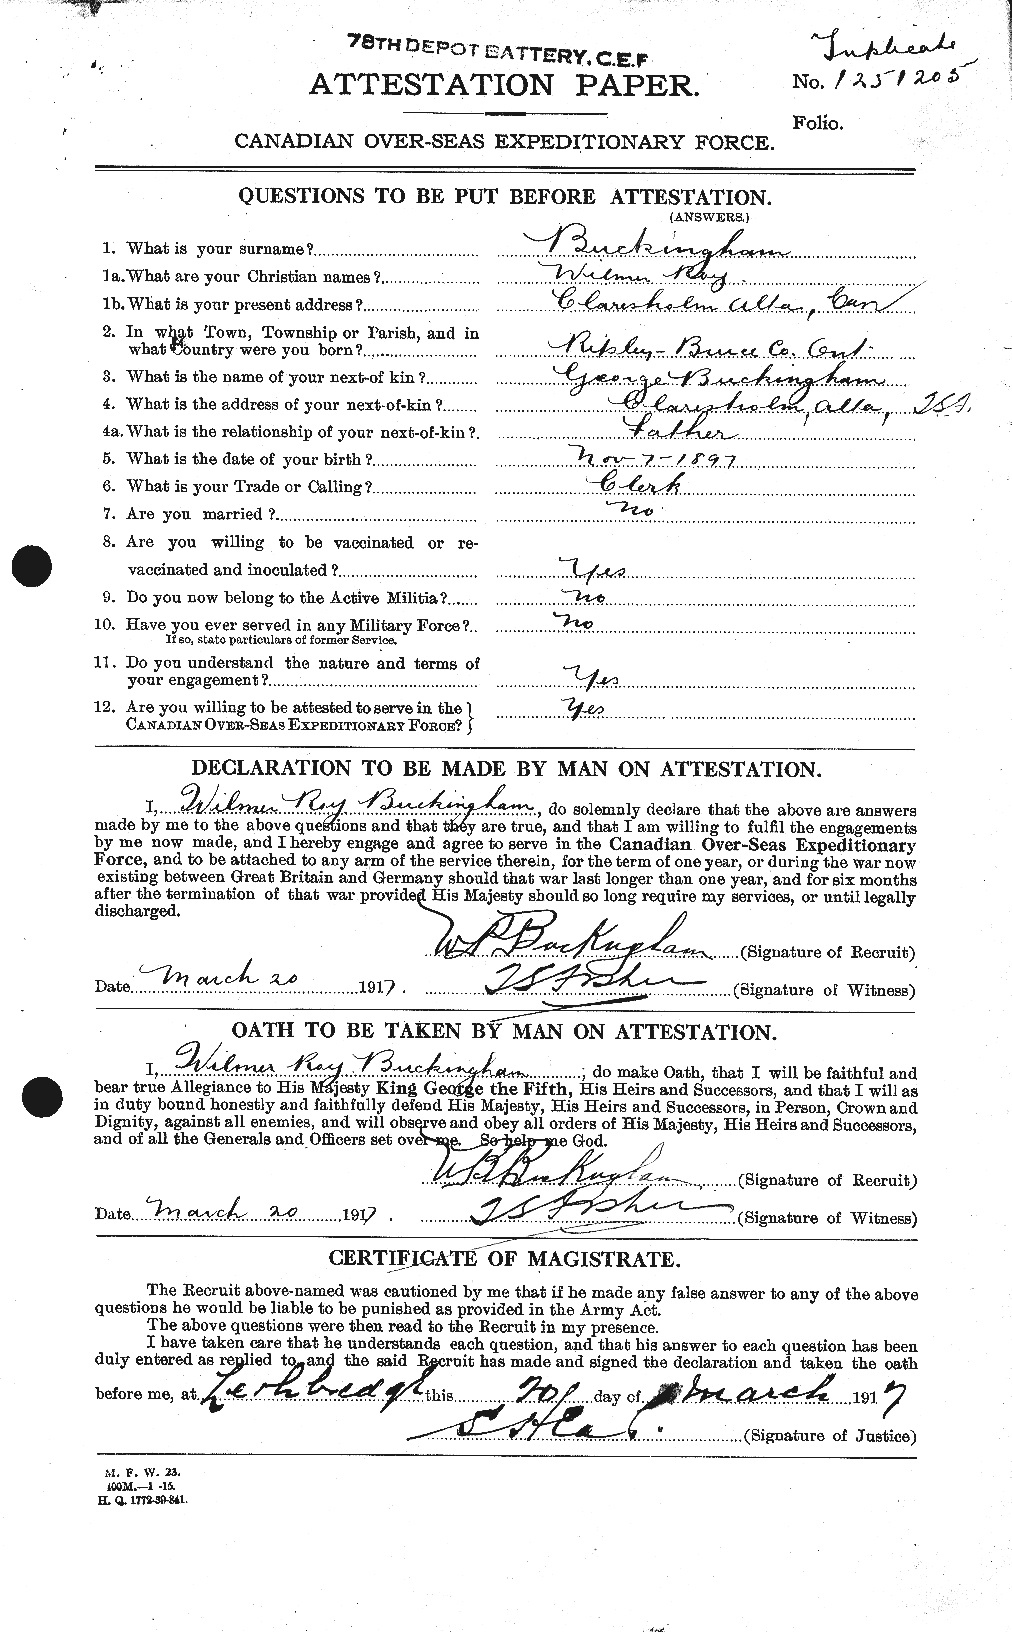 Personnel Records of the First World War - CEF 269476a